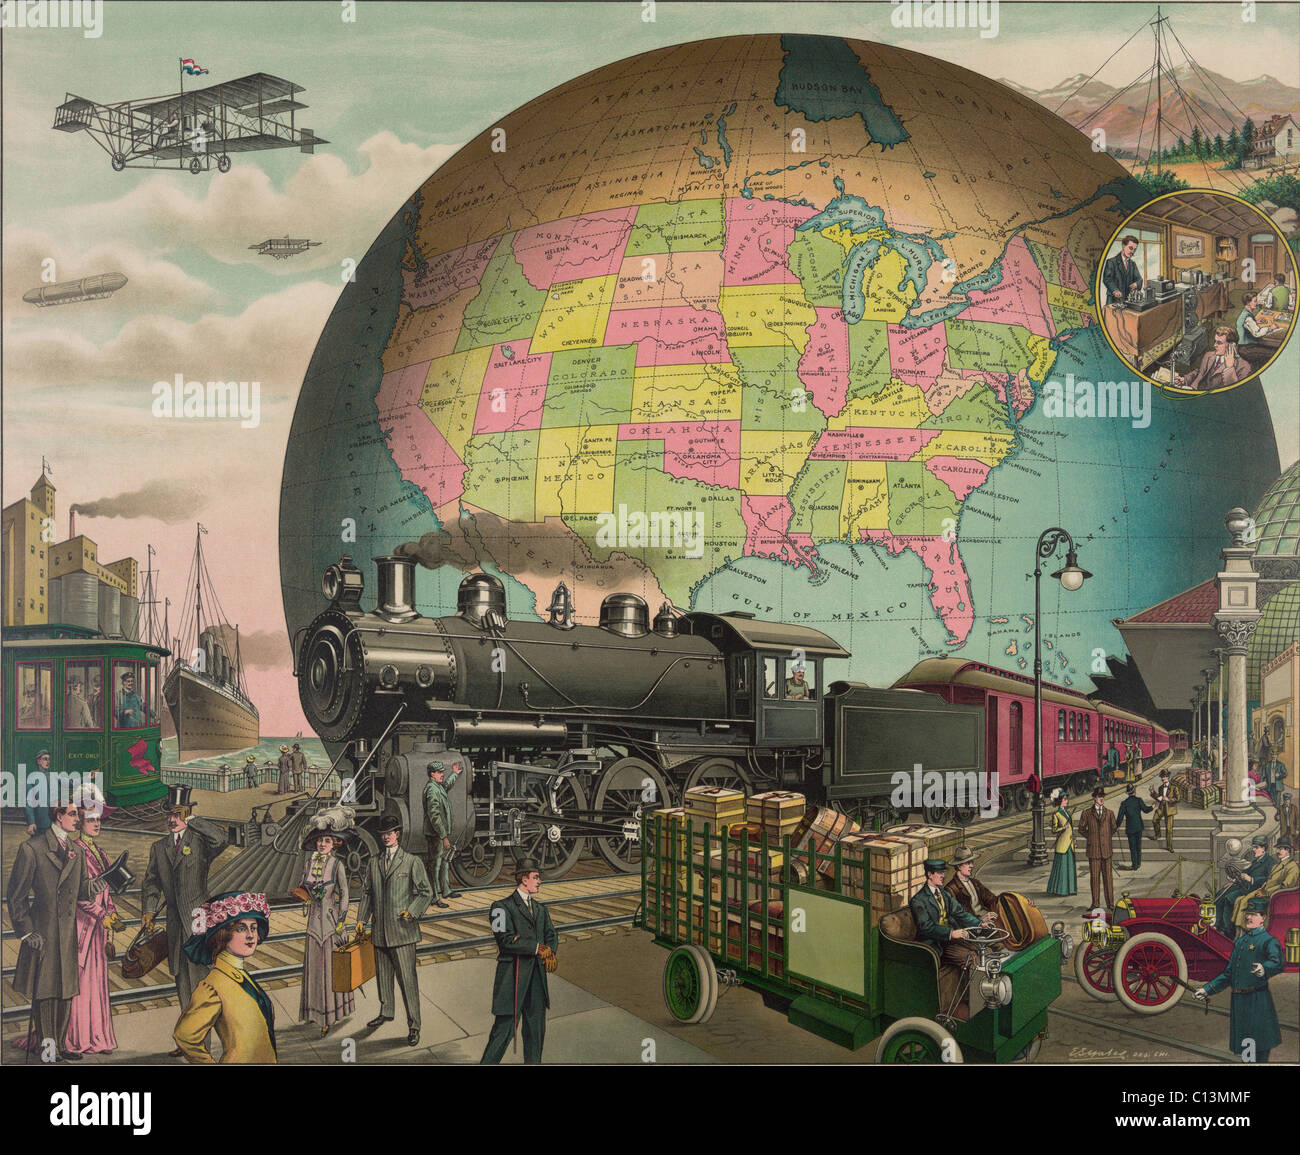 TWENTIETH CENTURY TRANSPORTATION. 1910 print illustrates the most advanced modes of transportation and communications with a map of the United States. LC-DIG-pga-01017 Stock Photo